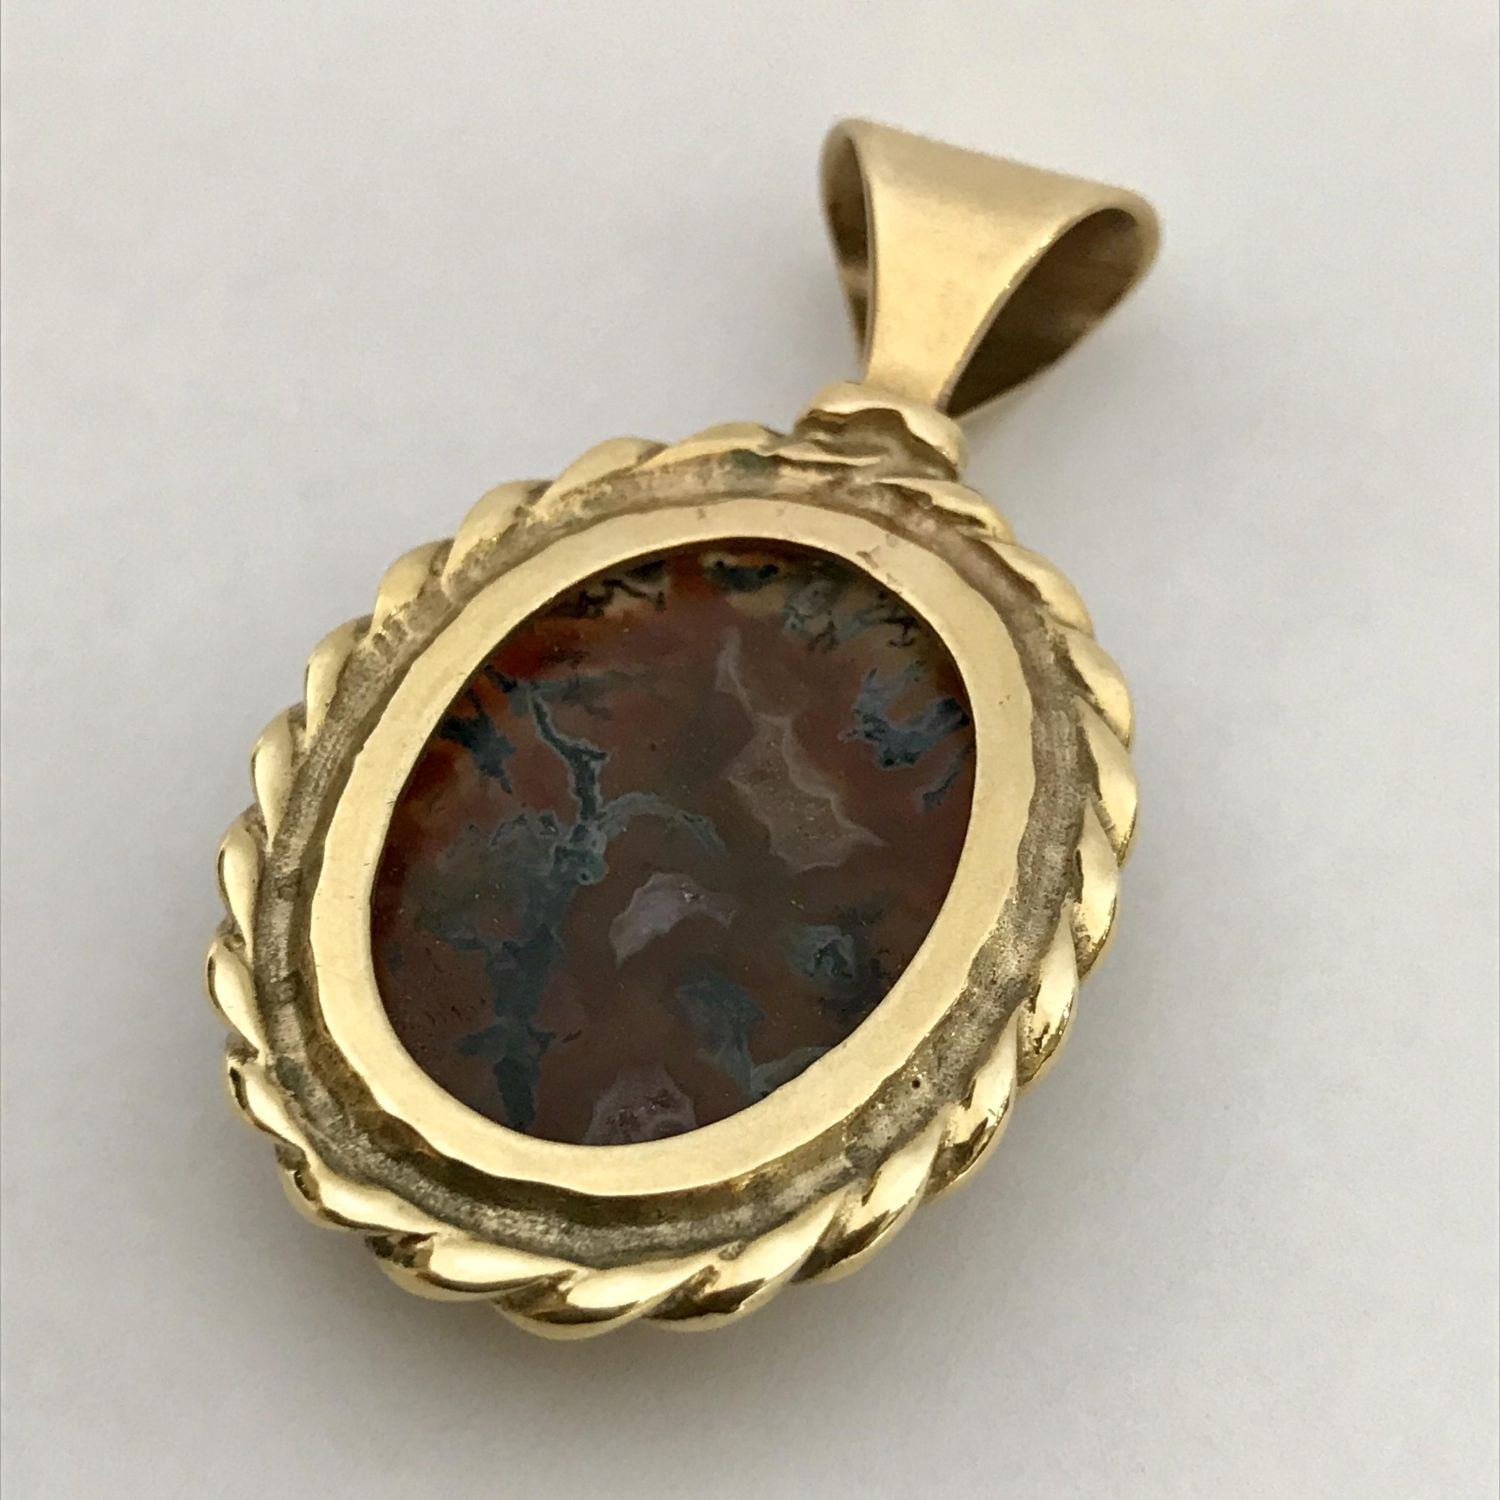 Moss Agate Pendant - Jewellery & Gold - Hemswell Antique Centres